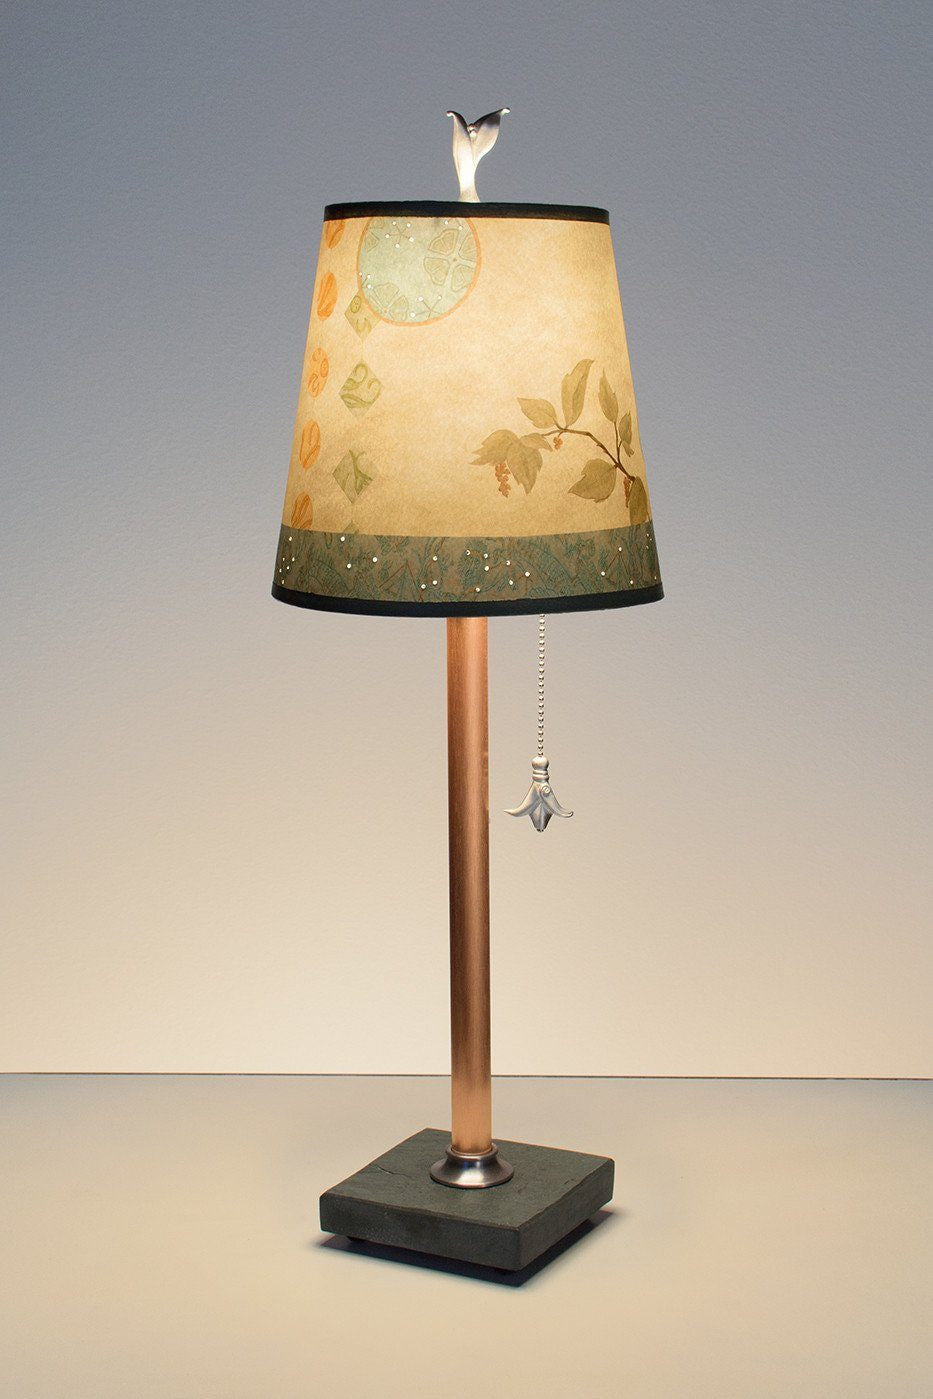 Copper Table Lamp on Vermont Slate Base with Small Drum Shade in Celestial Leaf Lit